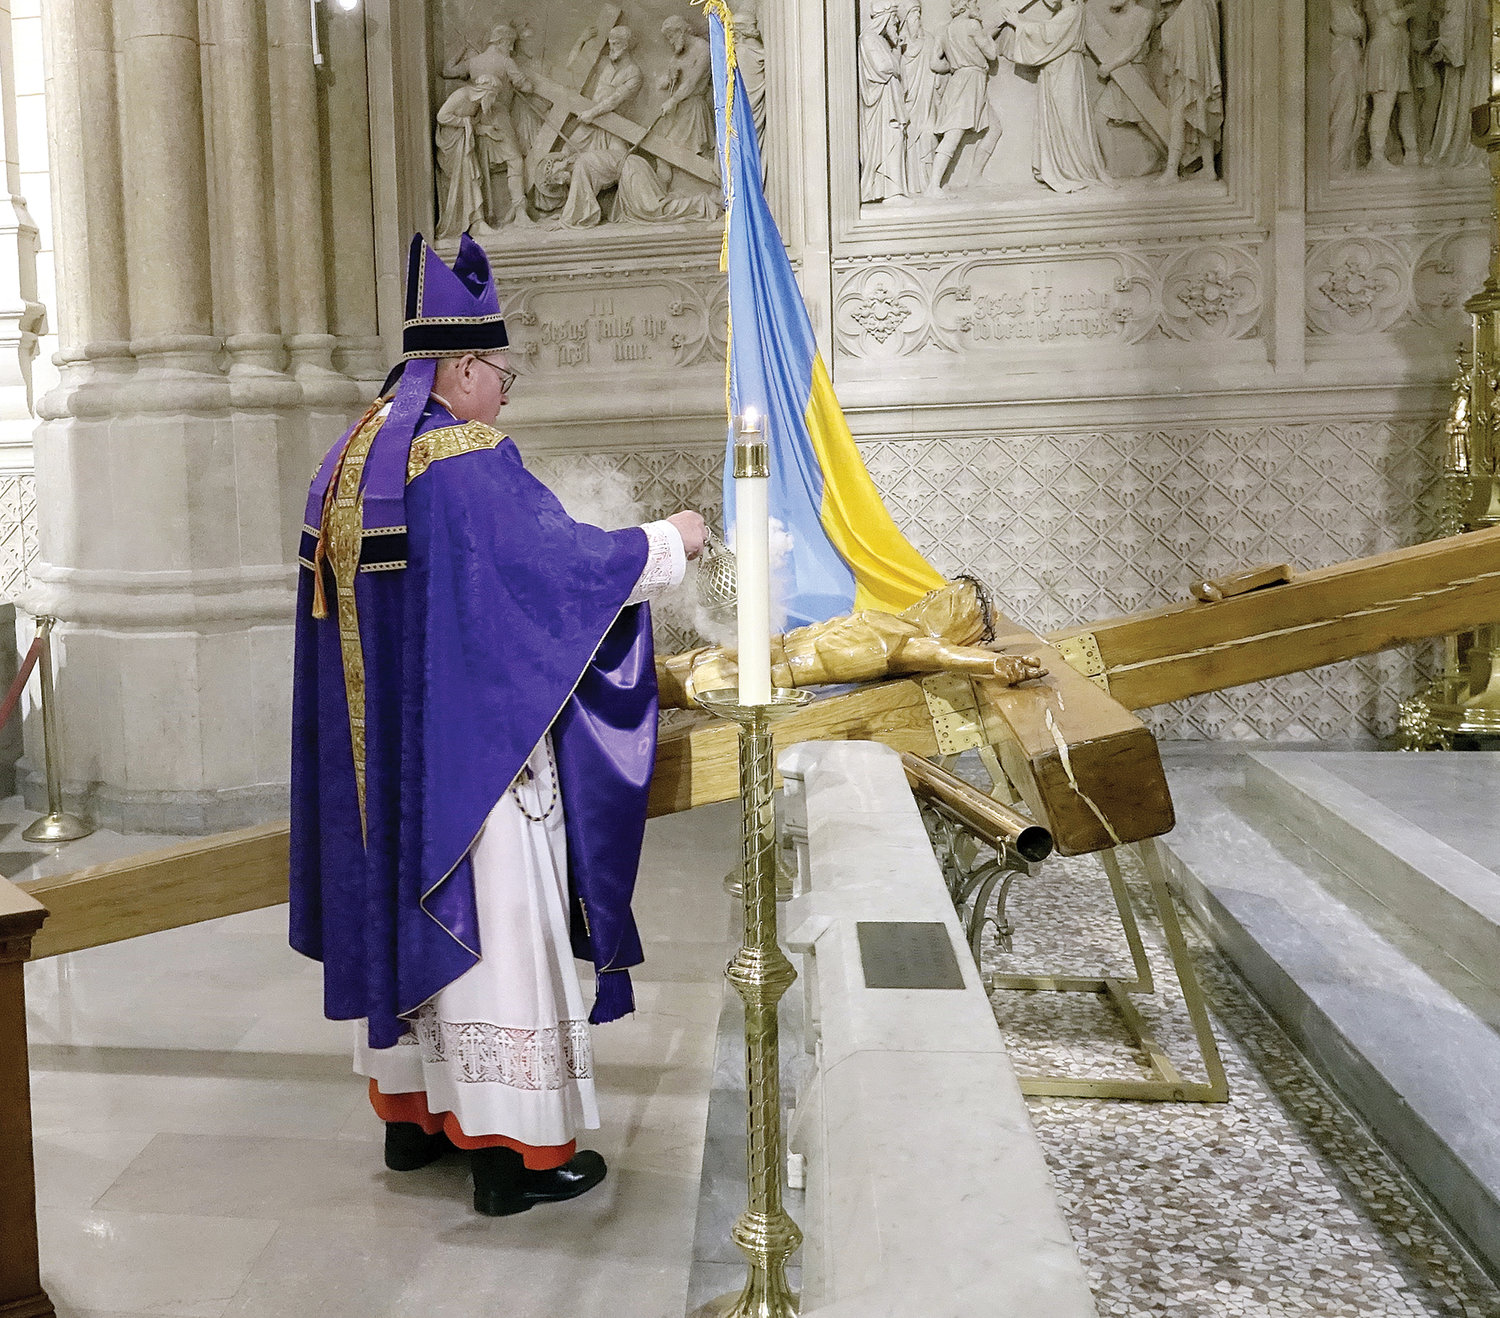 Cardinal Dolan incenses a Ukrainian Cross of Gratitude before the 10:15 a.m. Sunday Mass March 6 at St. Patrick’s Cathedral. The cross, constructed in 2003 in Lviv, Ukraine, began its pilgrimage stop at the cathedral the day before and will remain there for two weeks. The arrival of the special cross is another sign of solidarity between the Ukrainian Catholic Church and the Archdiocese of New York, who together pray for peace in Ukraine. The cross was welcomed by Father Enrique Salvo, rector of the cathedral, and Father Elias Bronovskyy, O.S.B.M., pastor of St. George Ukrainian Catholic Church in Manhattan. Built in anticipation of the 2000th anniversary of the passion, death and resurrection of Christ in 2033, the cross has traveled to more than 46 countries.